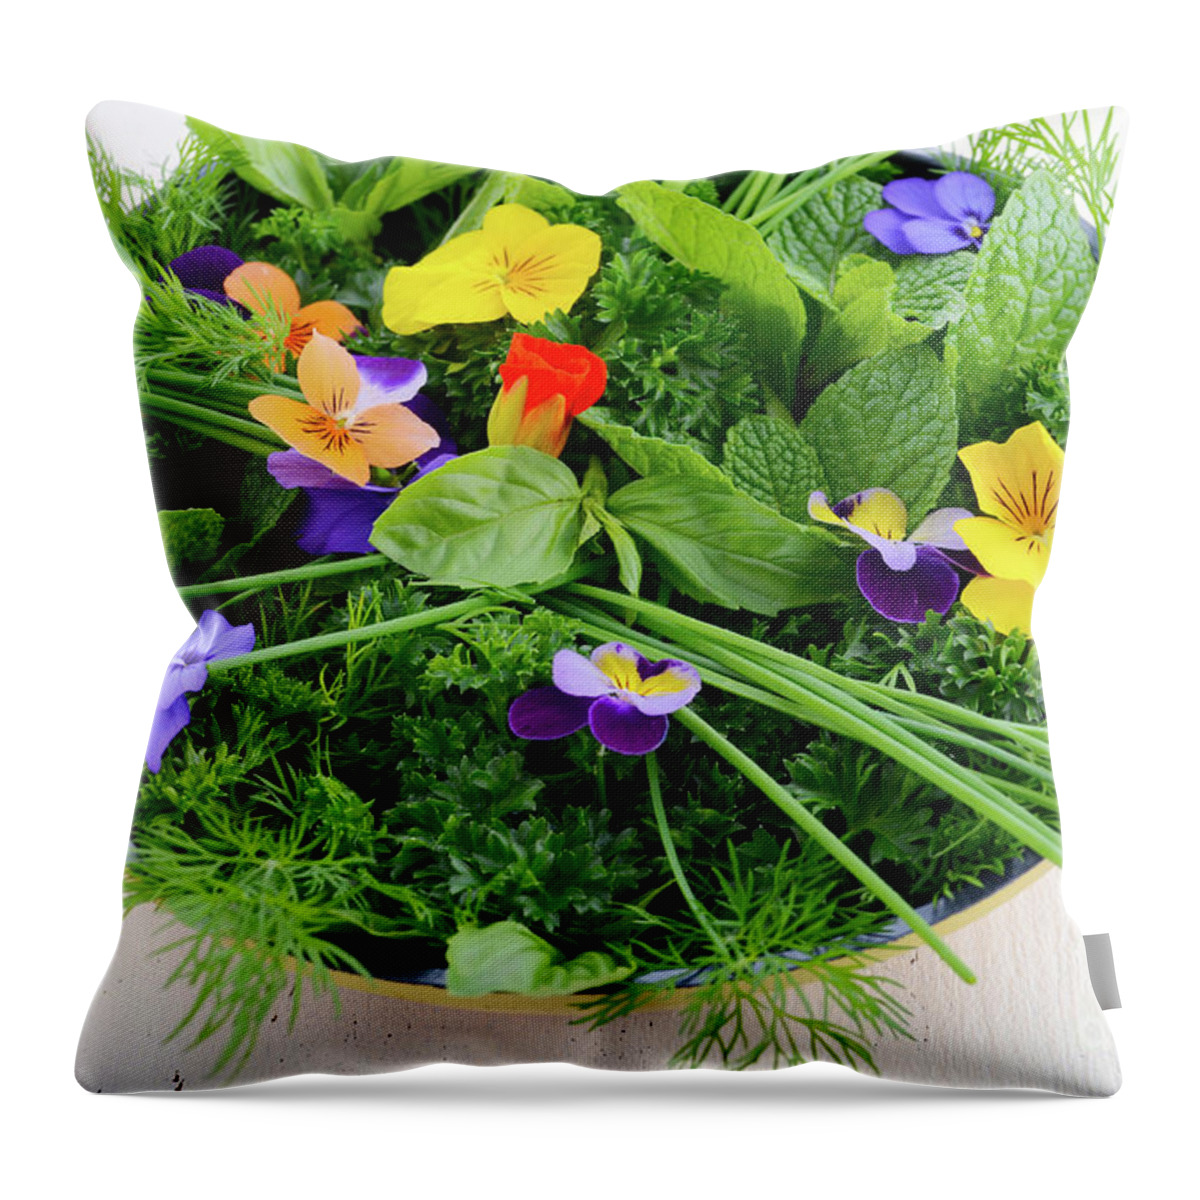 Afternoon Tea Throw Pillow featuring the photograph Cooking with Herbs Concept. by Milleflore Images